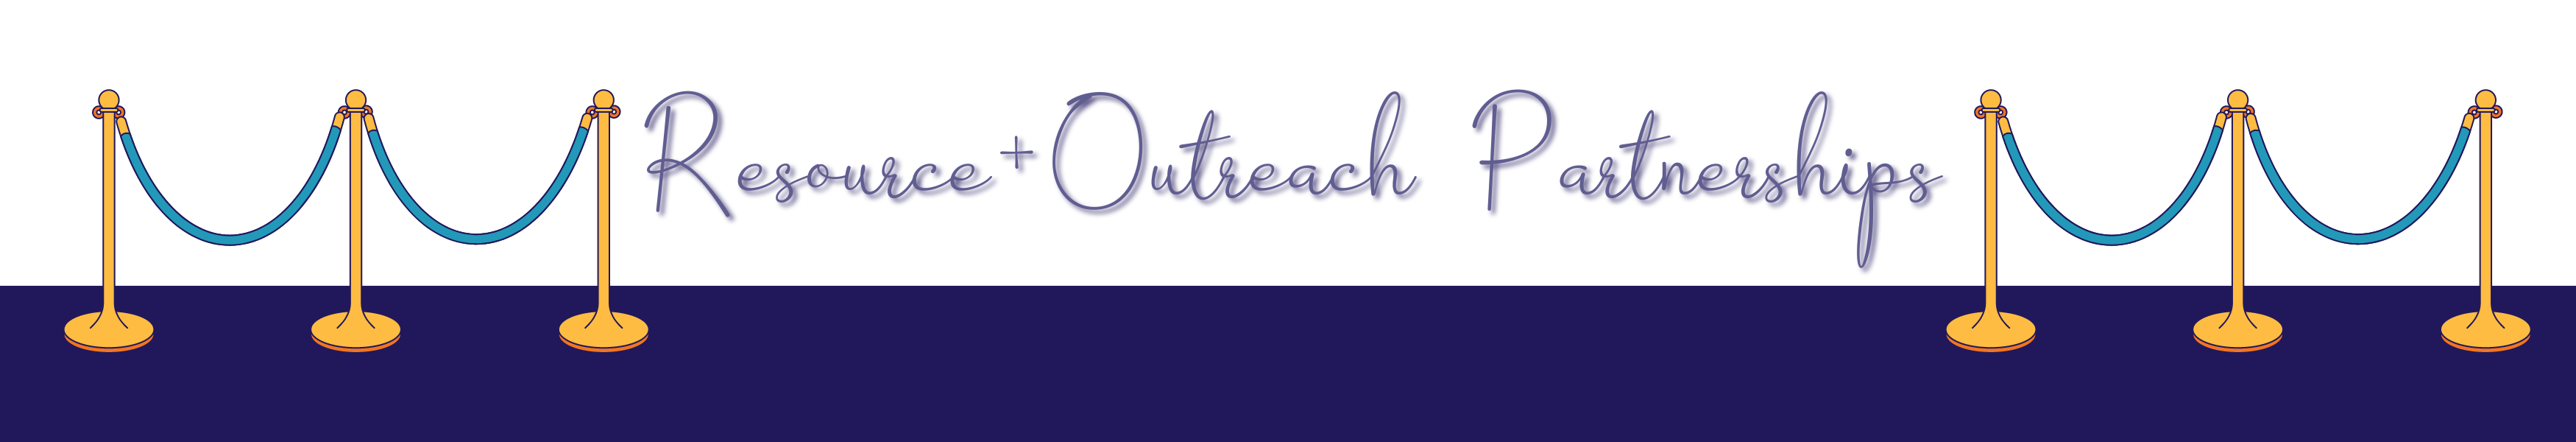 Research + Outreach Partnerships